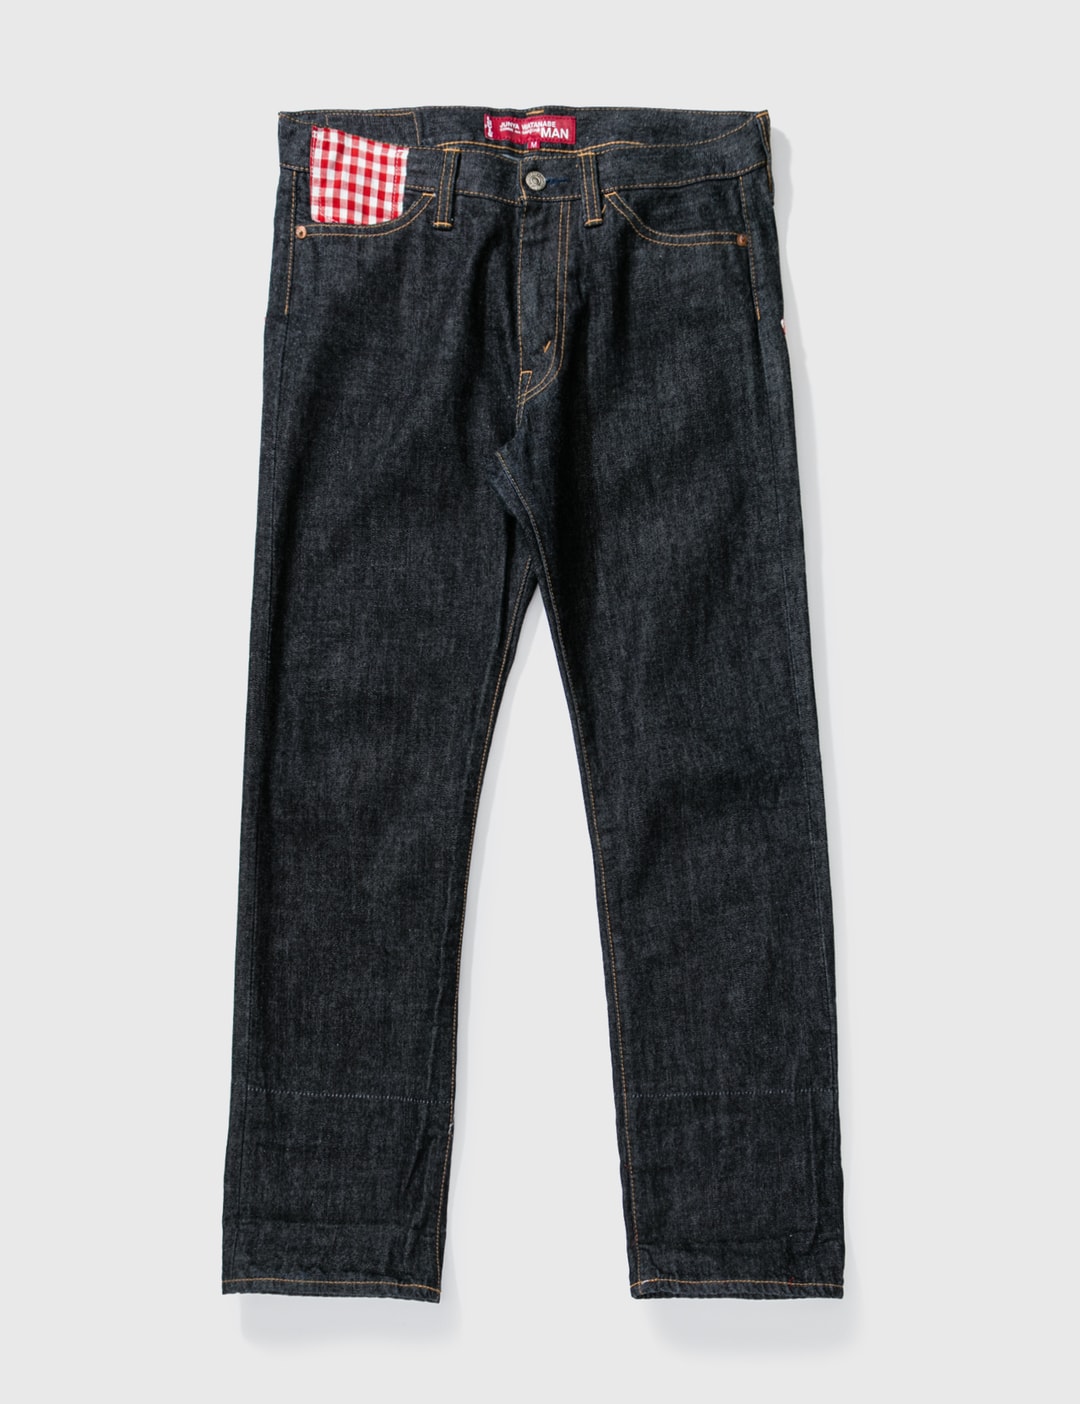 Junya Watanabe - Junya Watanabe X Levis 505 Jeans | HBX - Globally Curated  Fashion and Lifestyle by Hypebeast